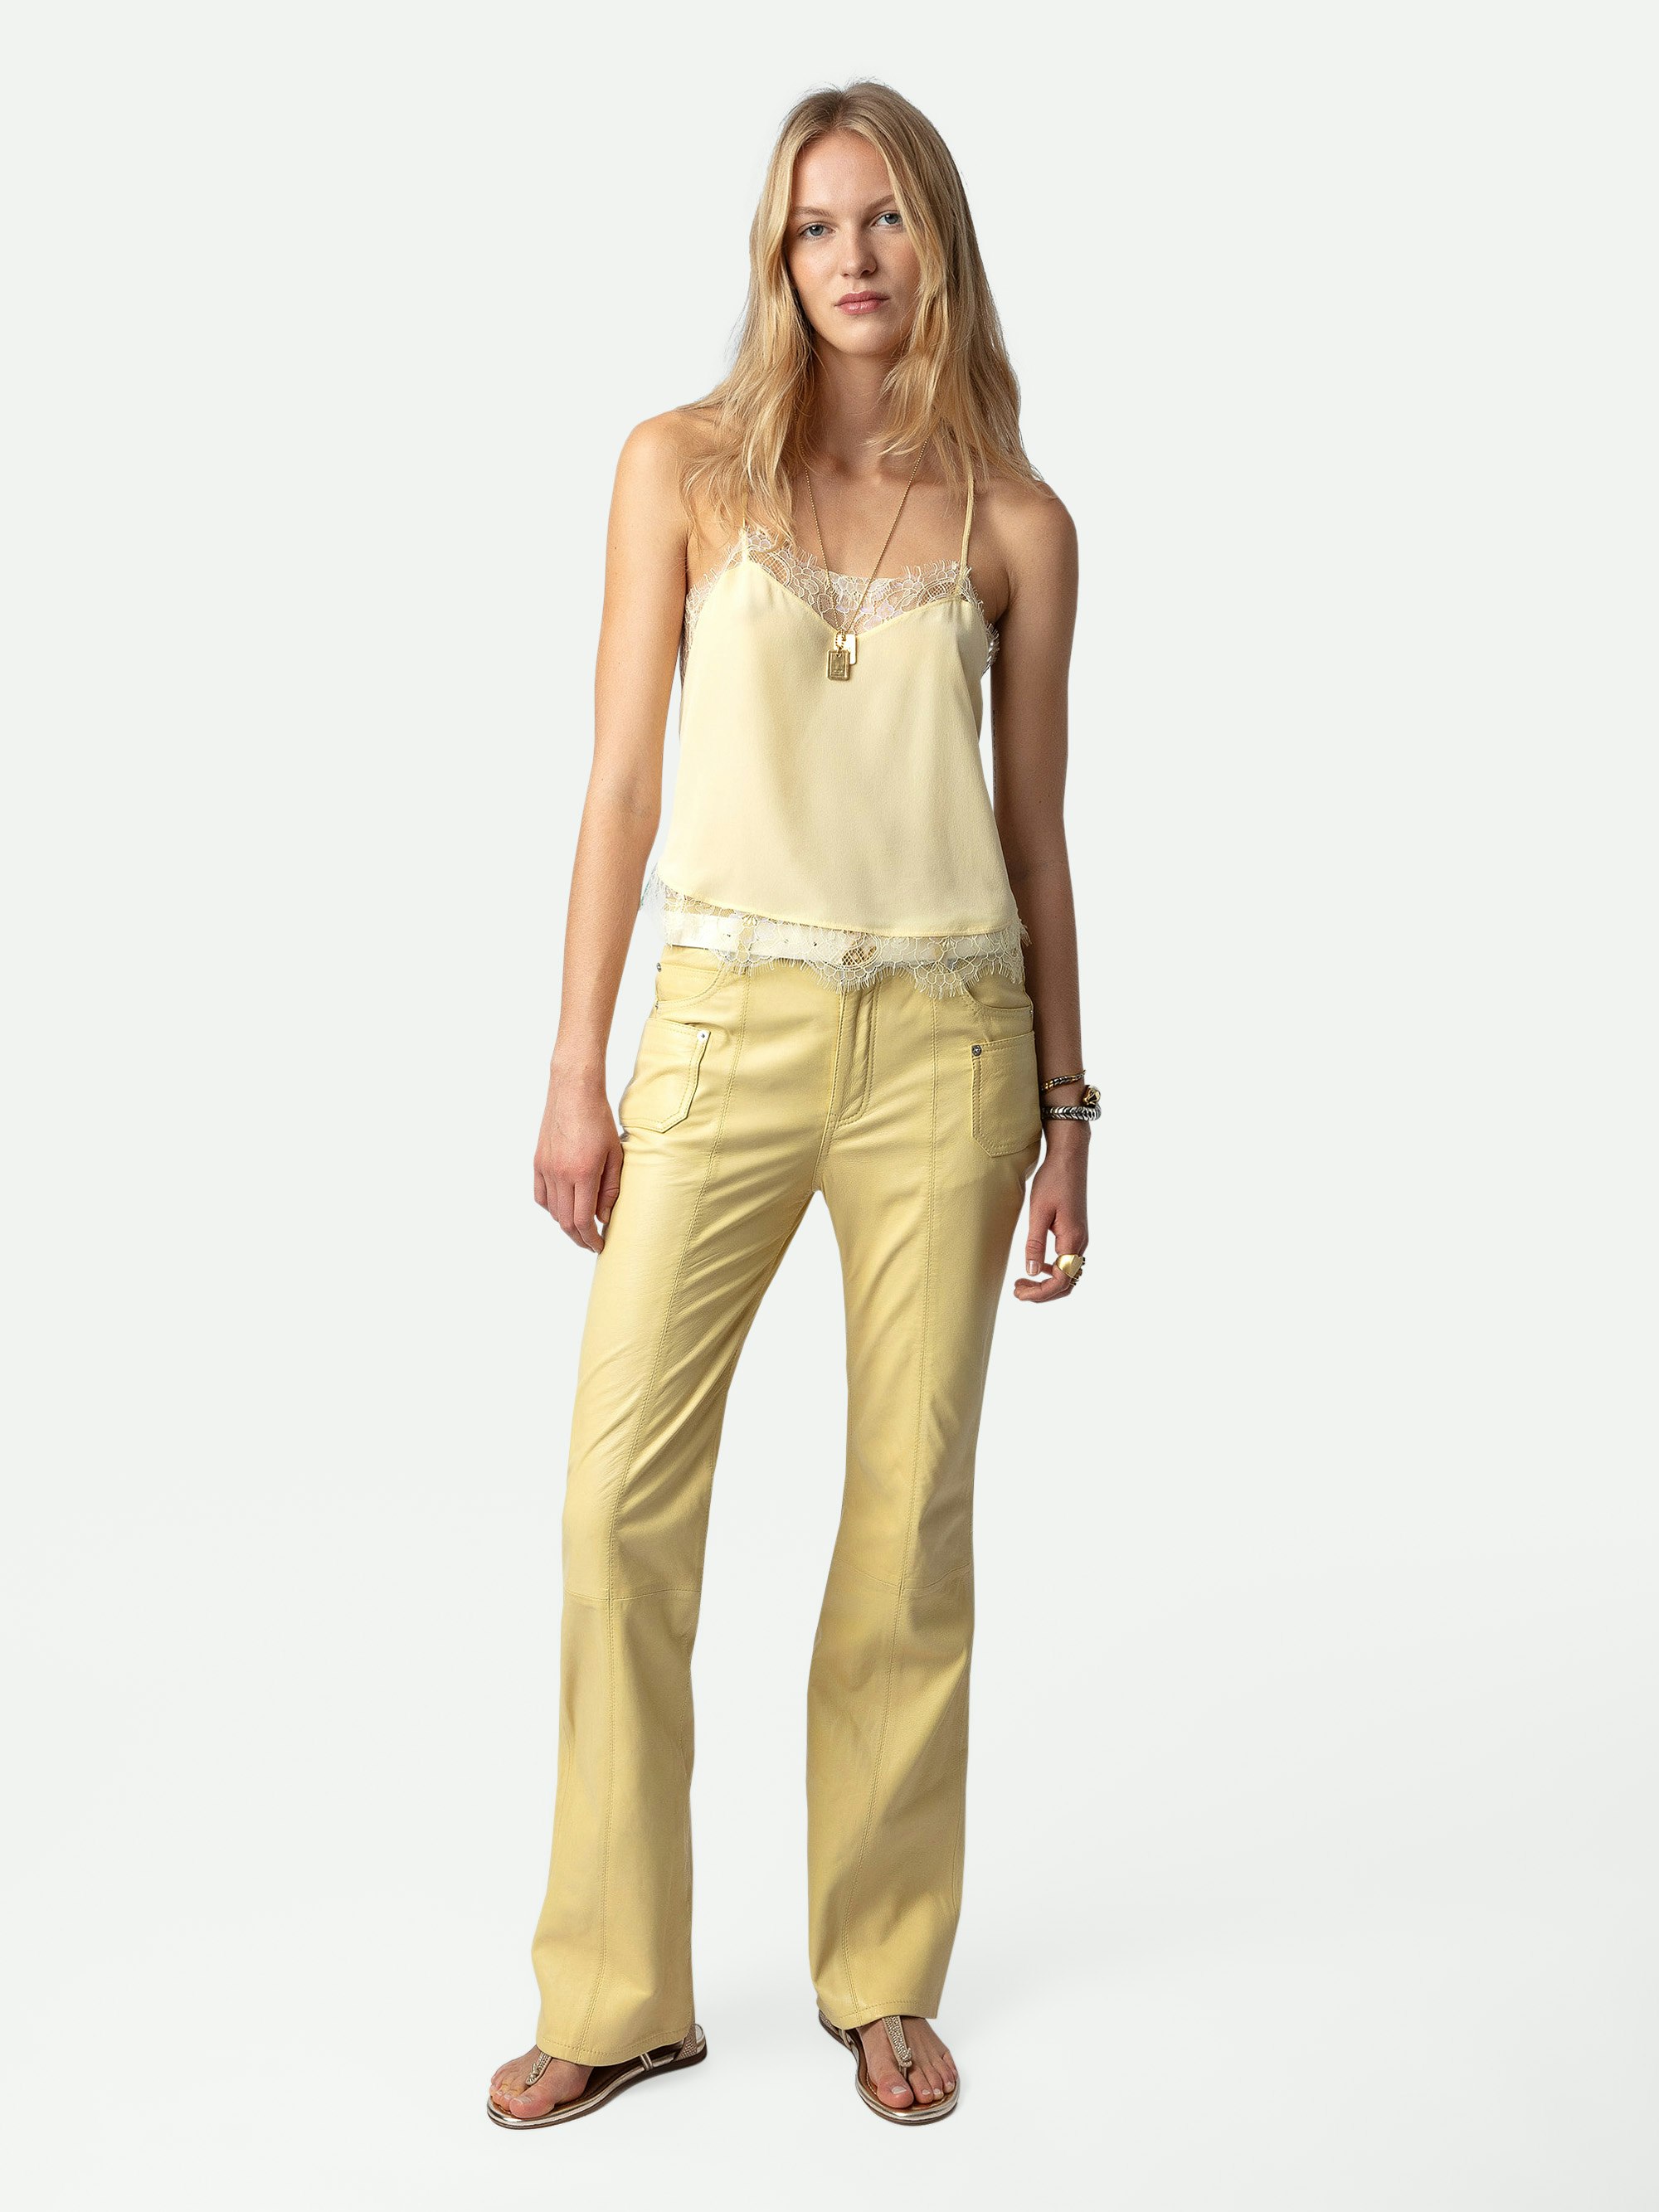 Elvir Leather Pants - Light yellow smooth leather trousers with flared hem and pockets.